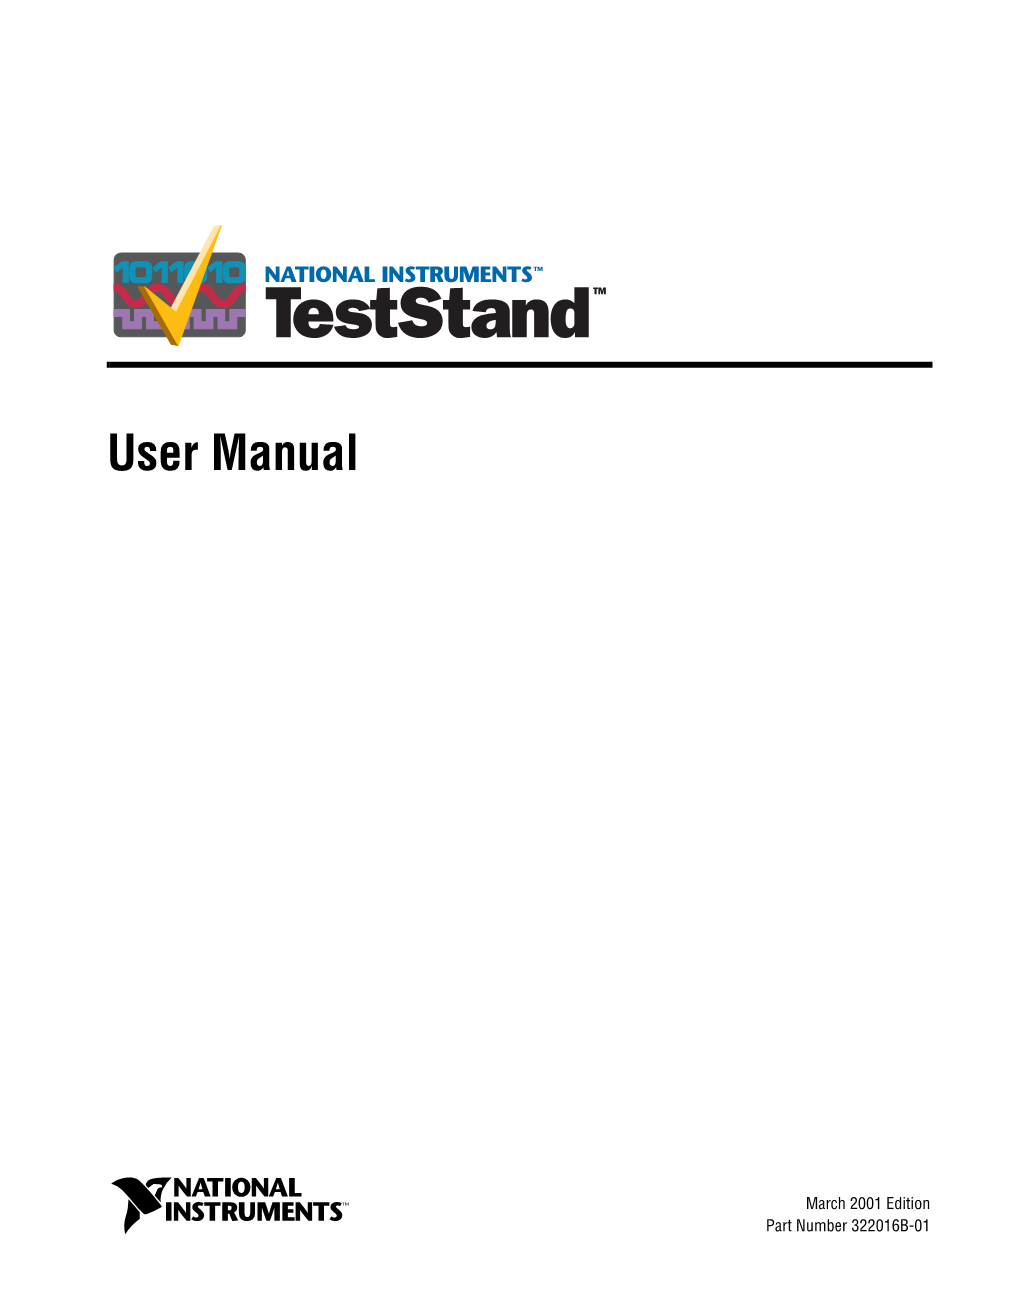 Archived: Teststand User Manual